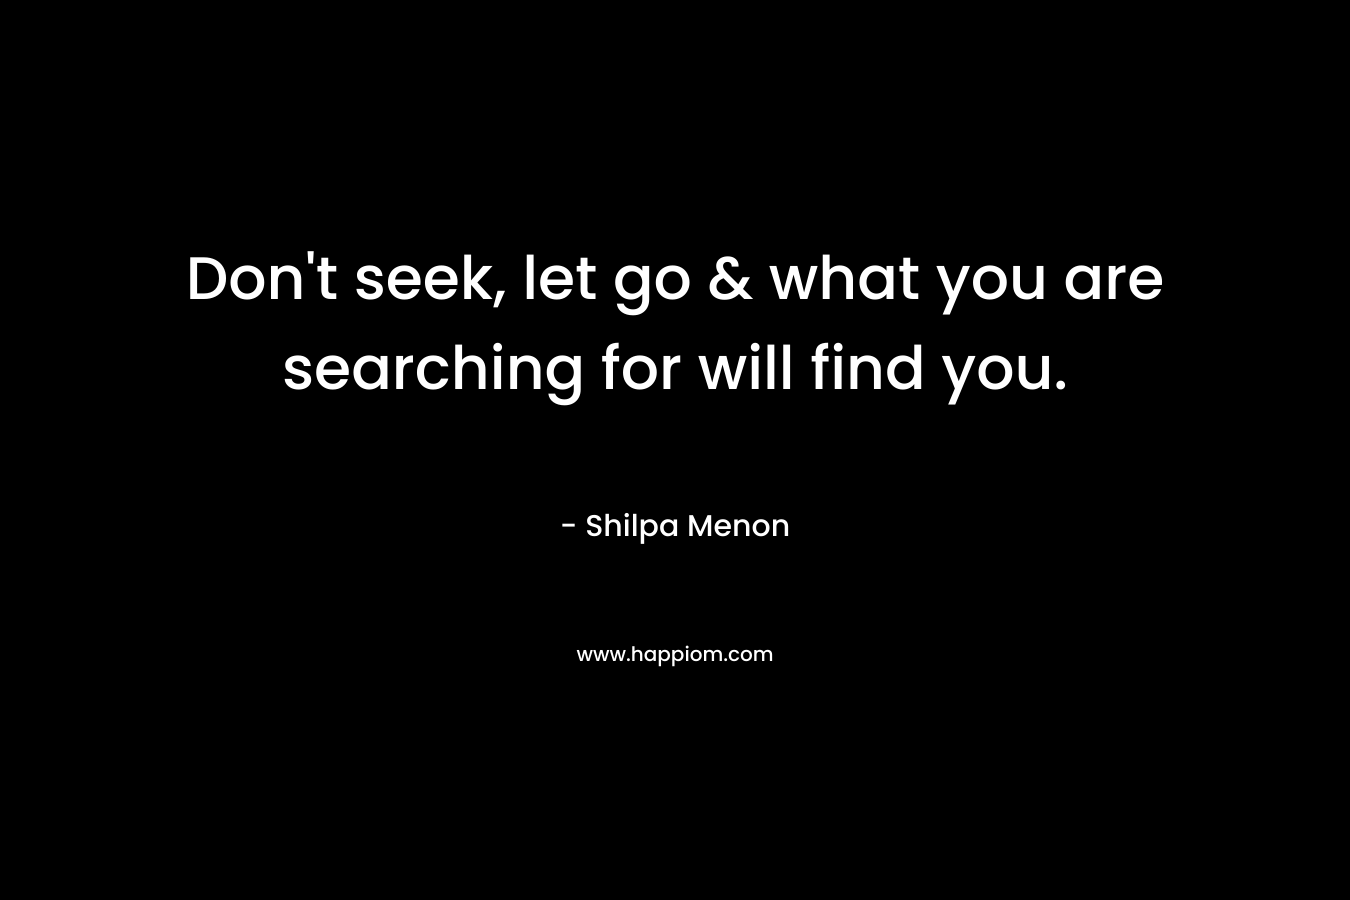 Don’t seek, let go & what you are searching for will find you. – Shilpa Menon